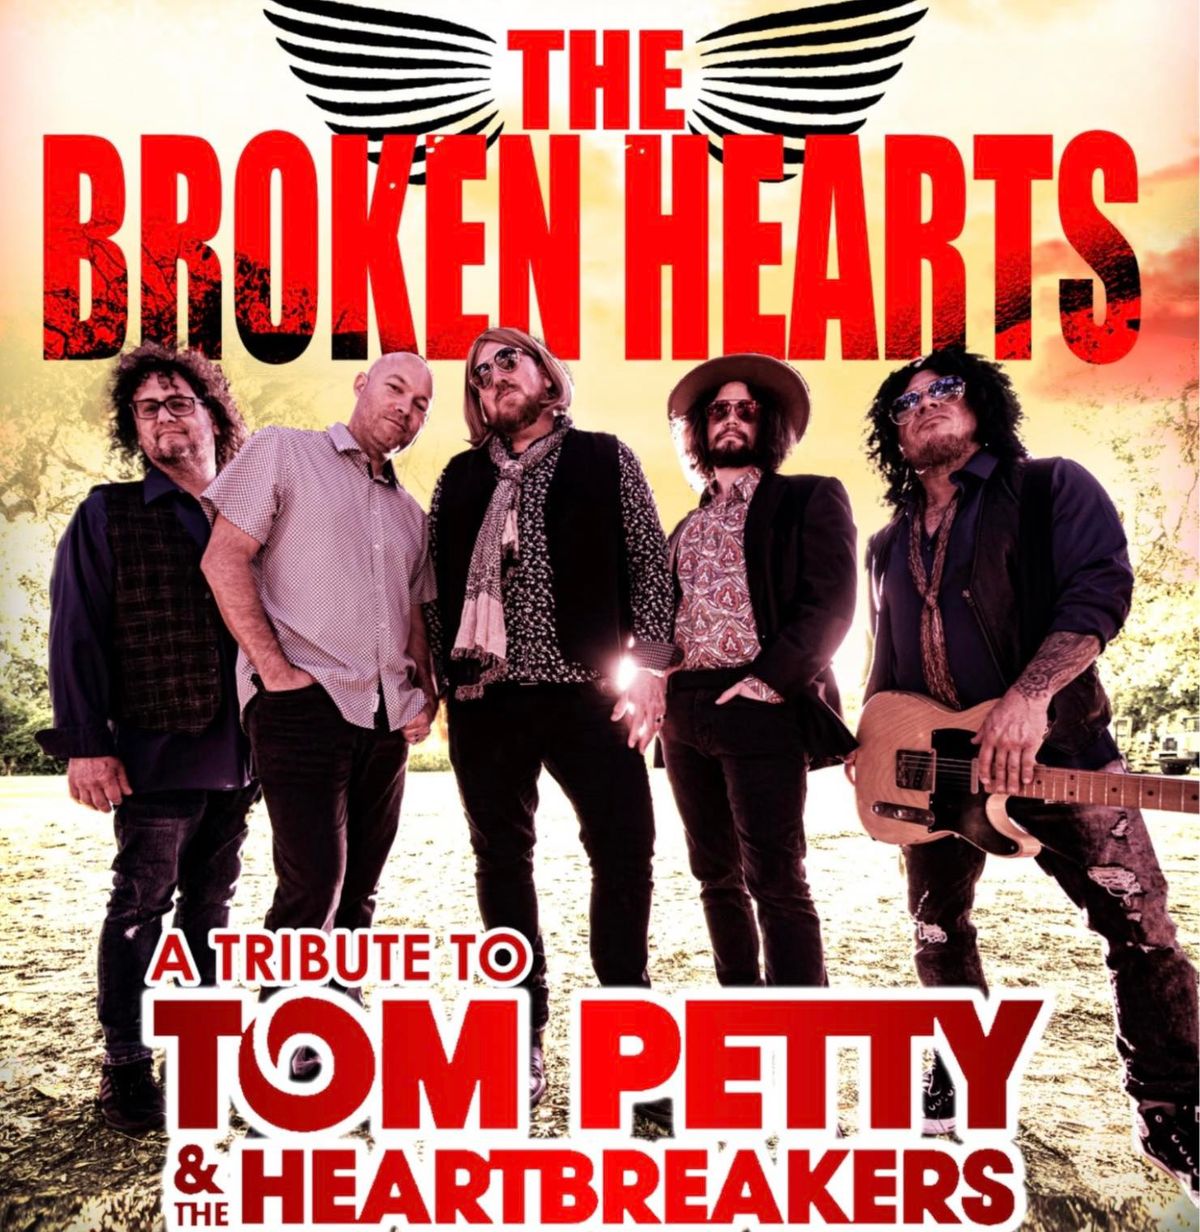 Florida\u2019s Tom Petty Tribute : The Broken Hearts with Jimmy Ray Swagger @ Bowstring Brews Raleigh, NC